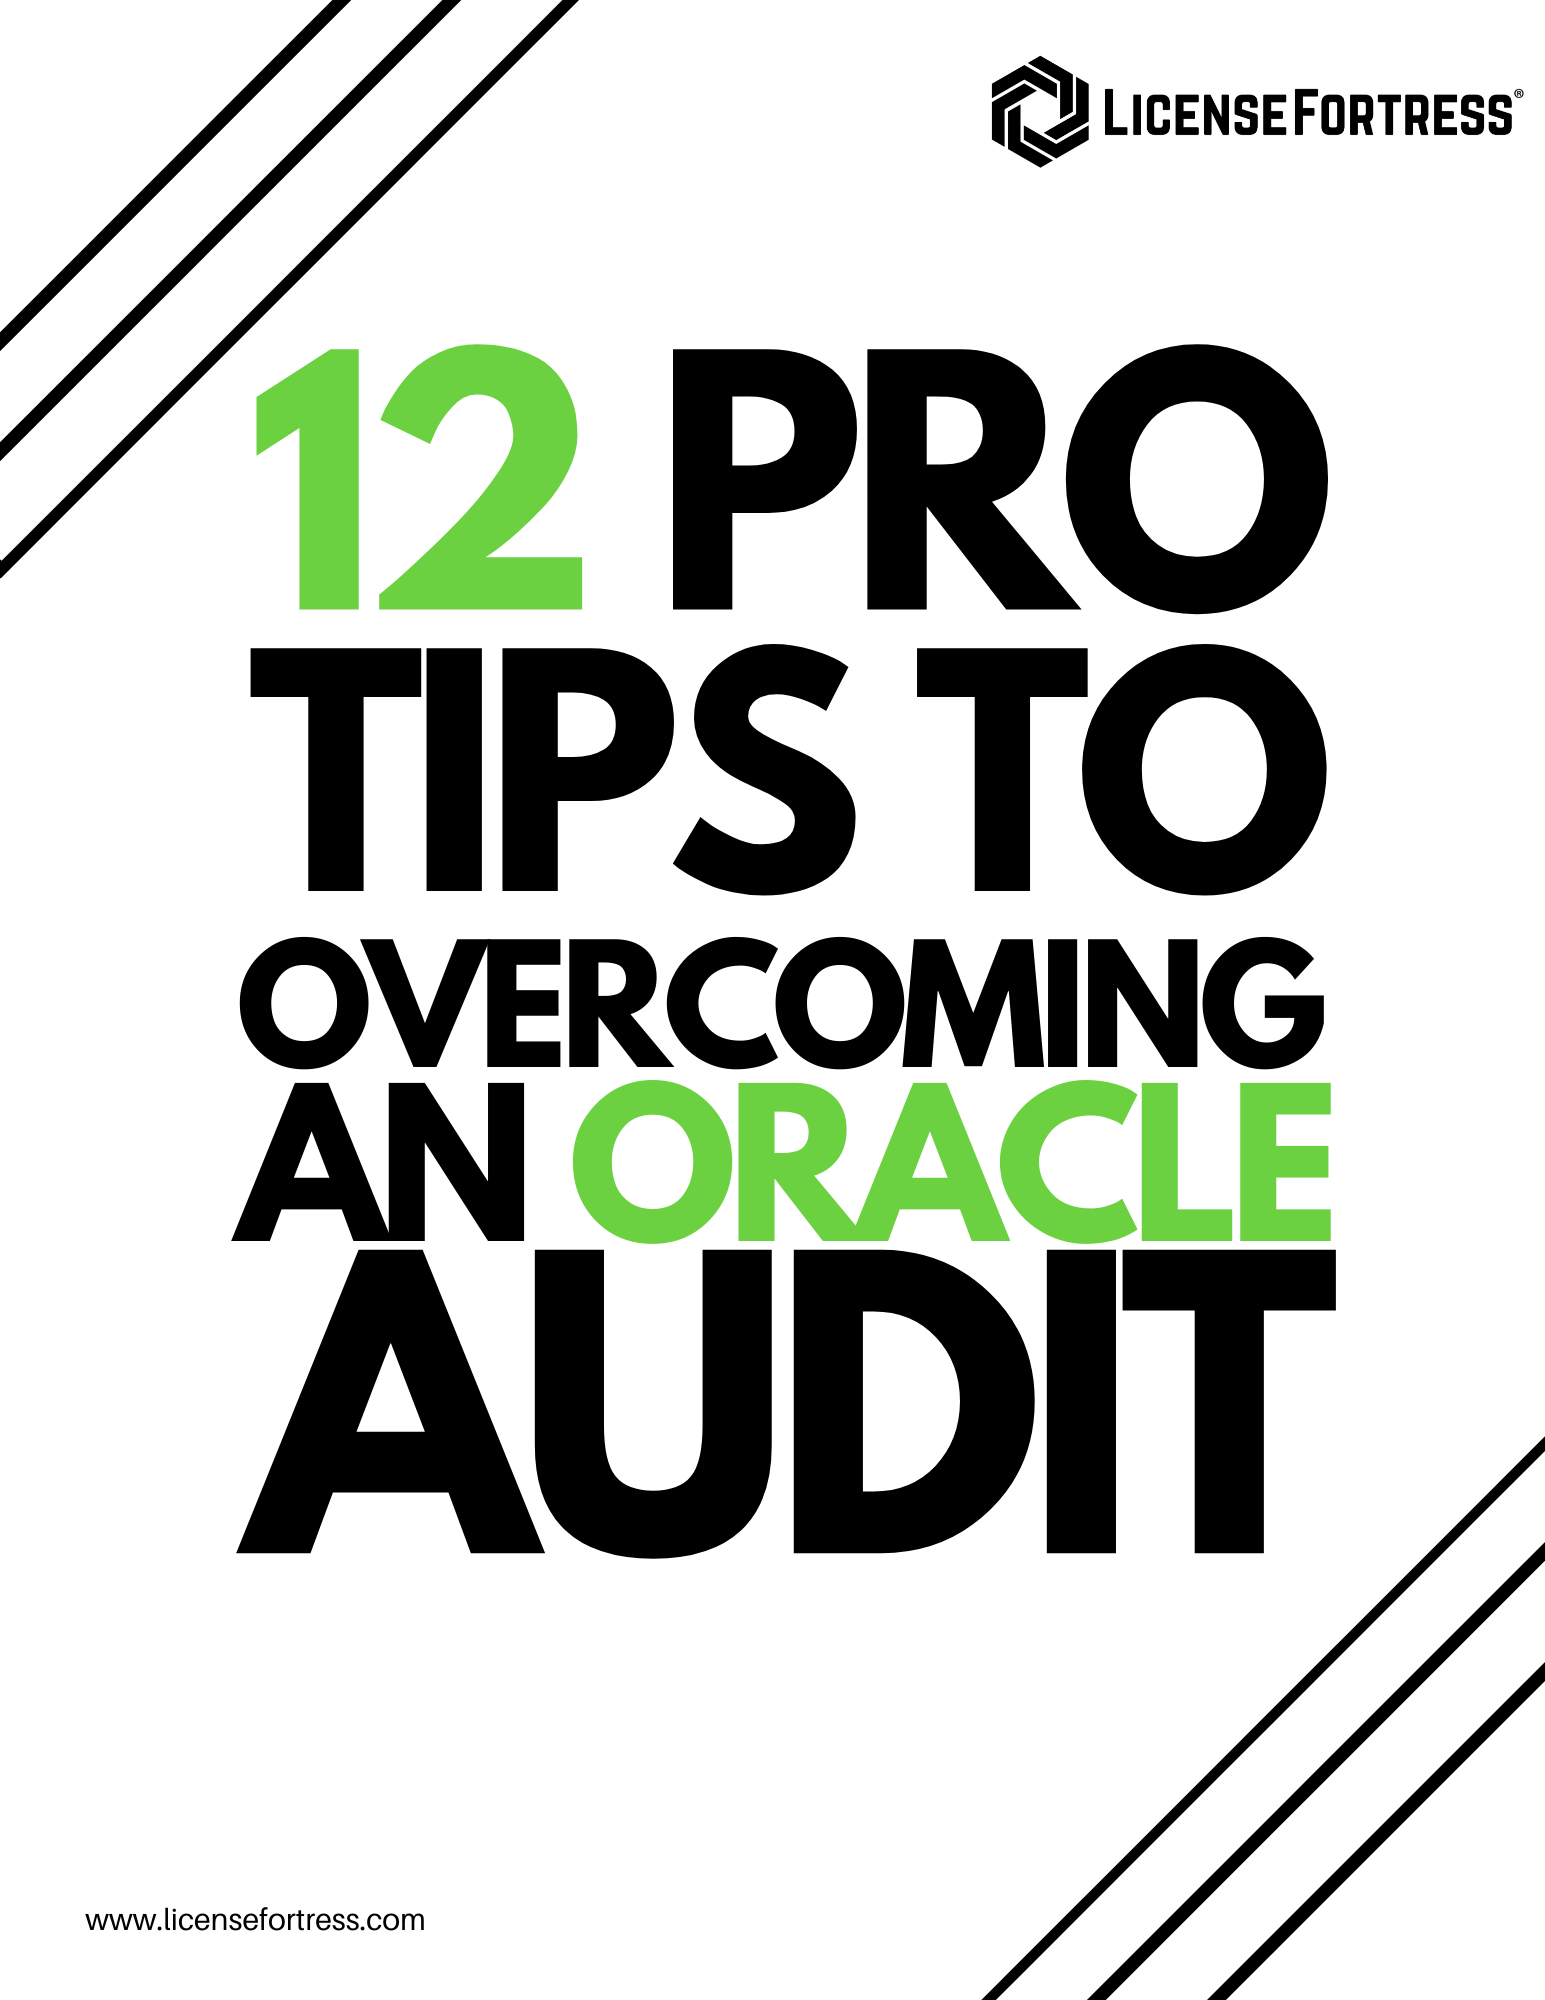 12 Pro Tips to Overcoming an Oracle Audit